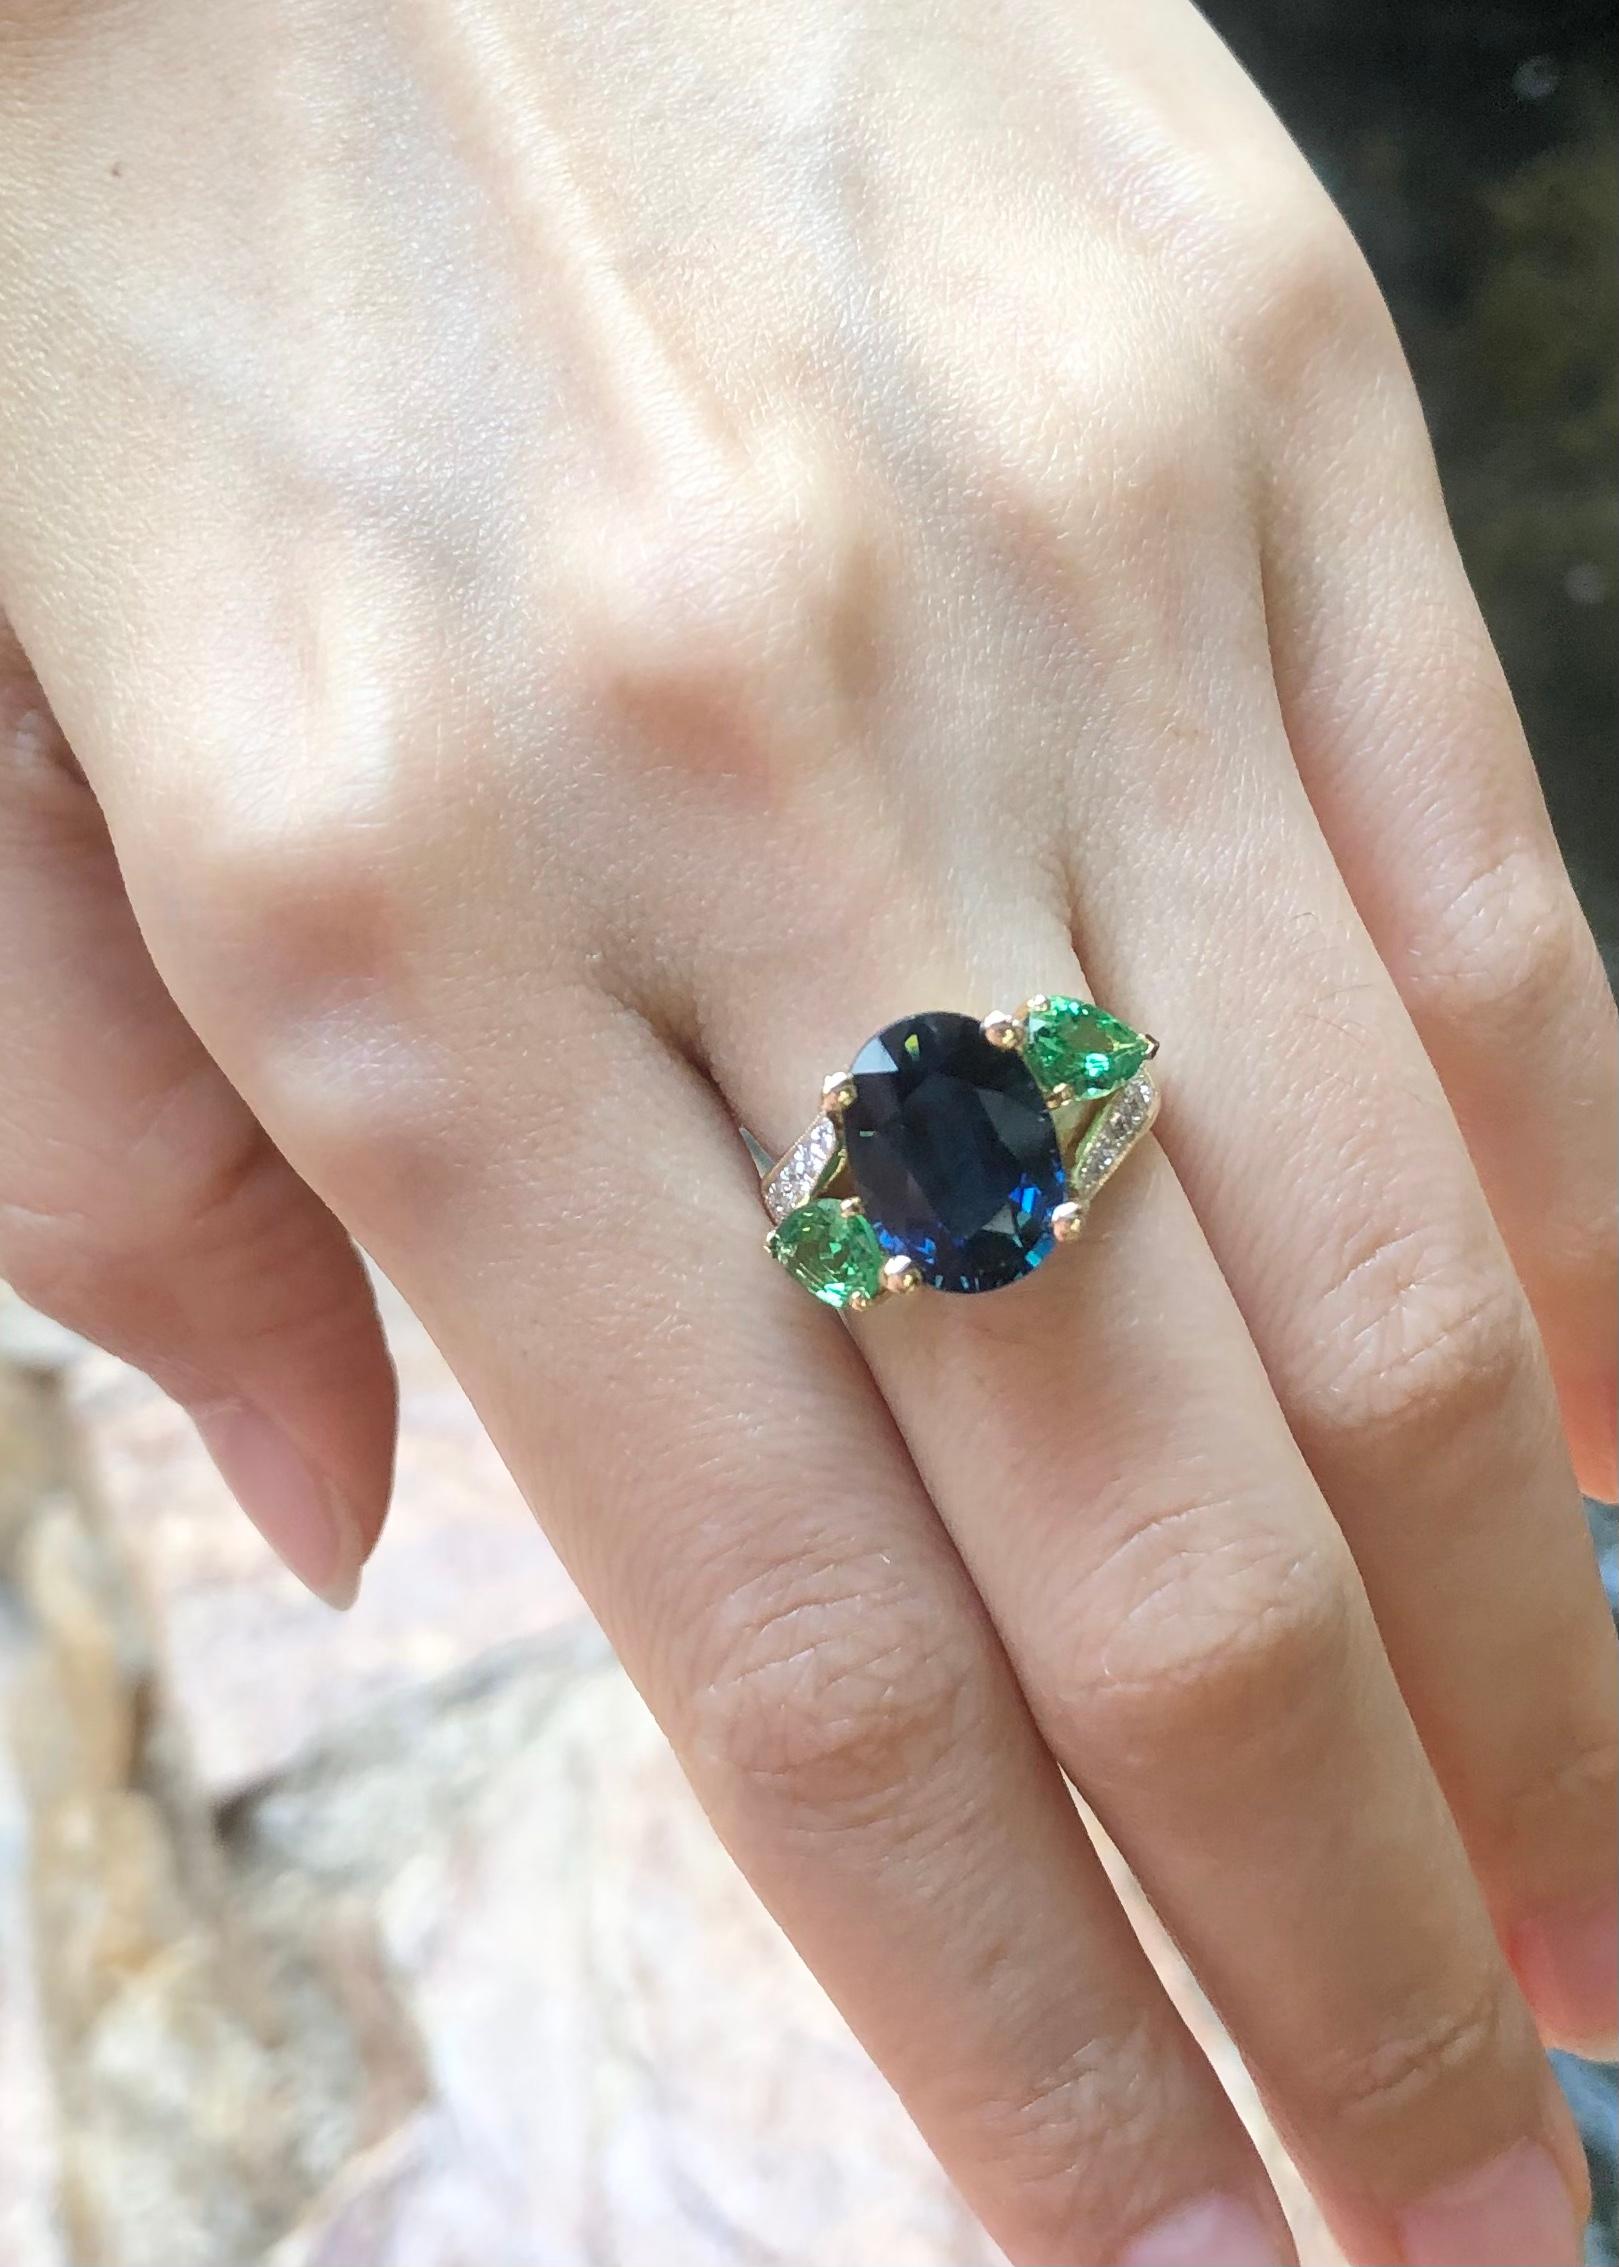 Blue Sapphire 5.77 carats, Tsavorite 1.37 carats and Diamond 0.46 carat Ring set in 18K White Gold Settings

Width:  2.0 cm 
Length: 1.2 cm
Ring Size: 51
Total Weight: 7.26 grams

